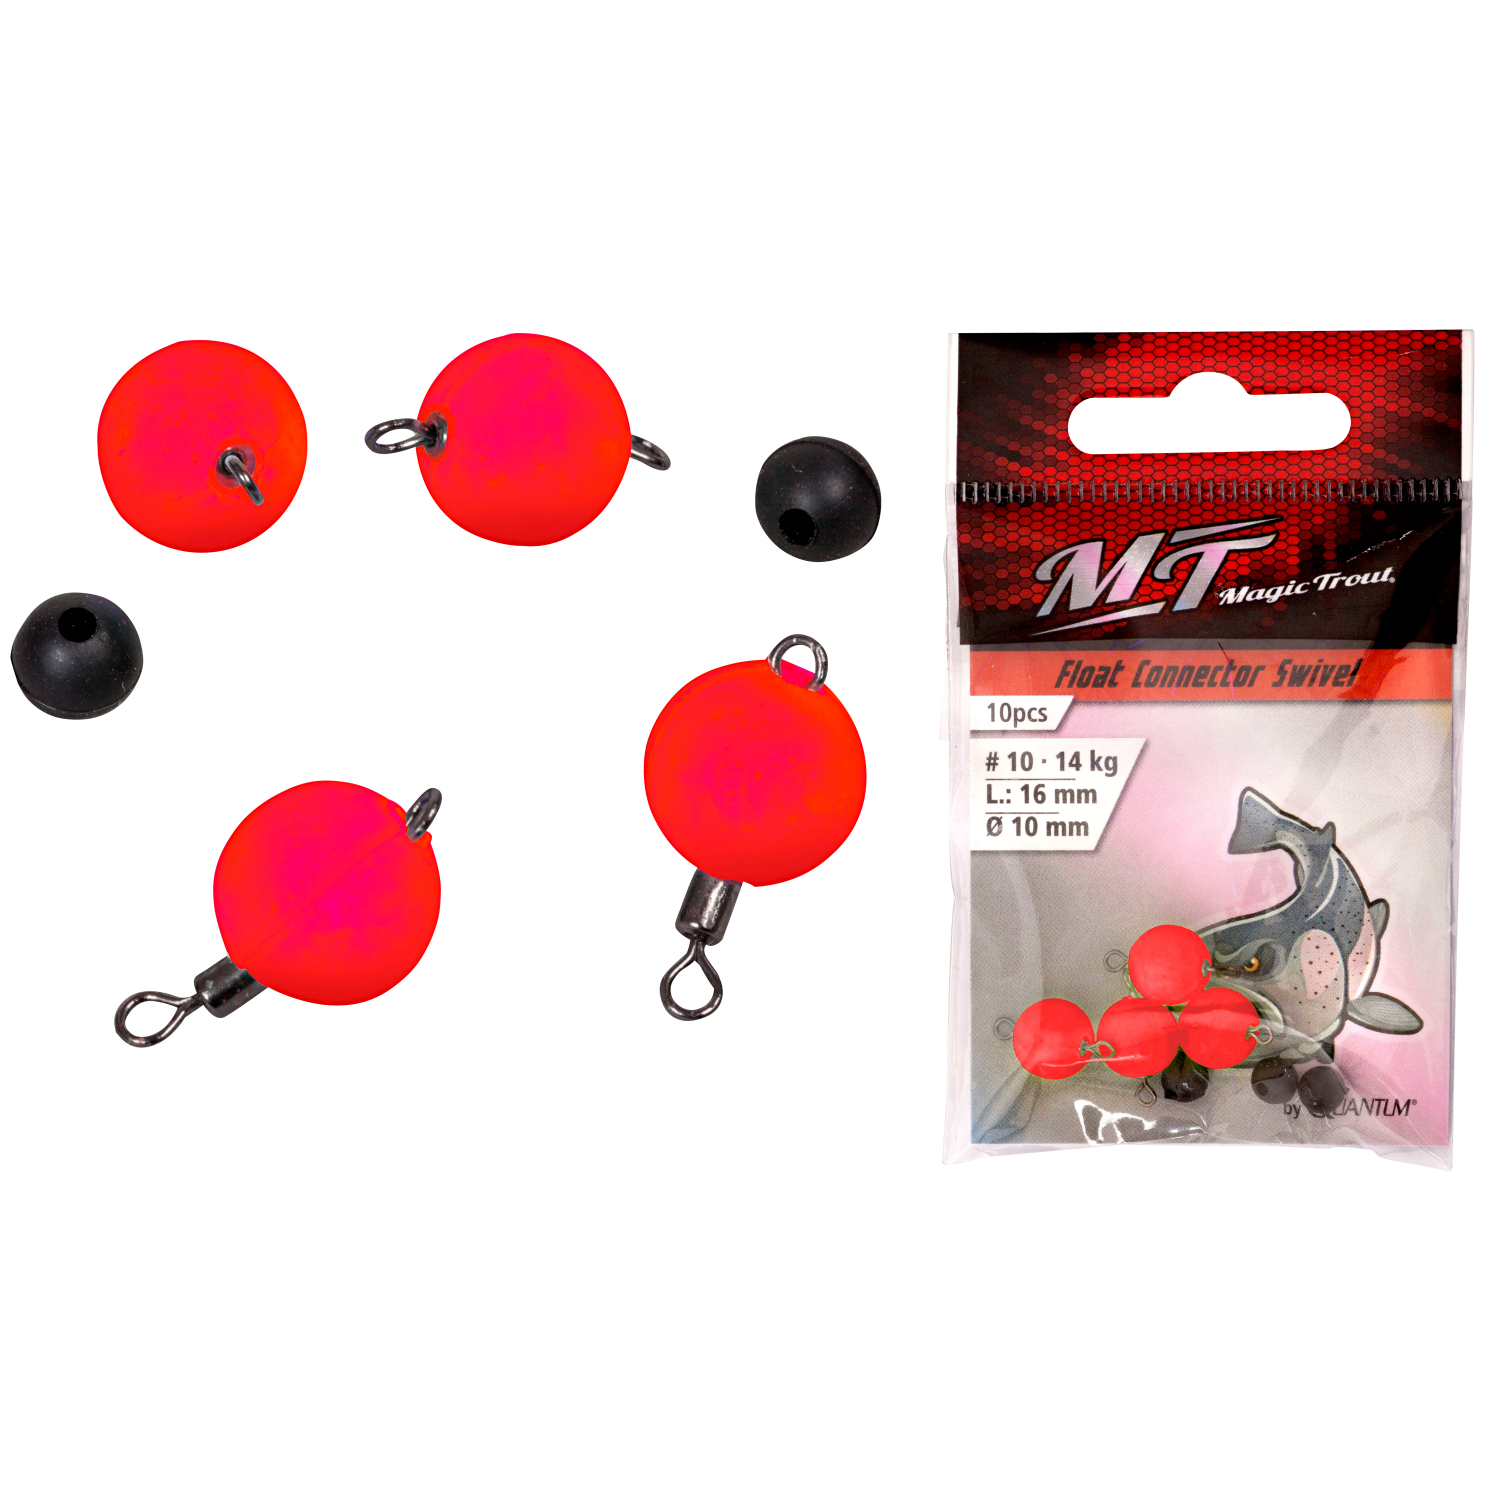 Magic Trout Float Connector Swivel (red) 